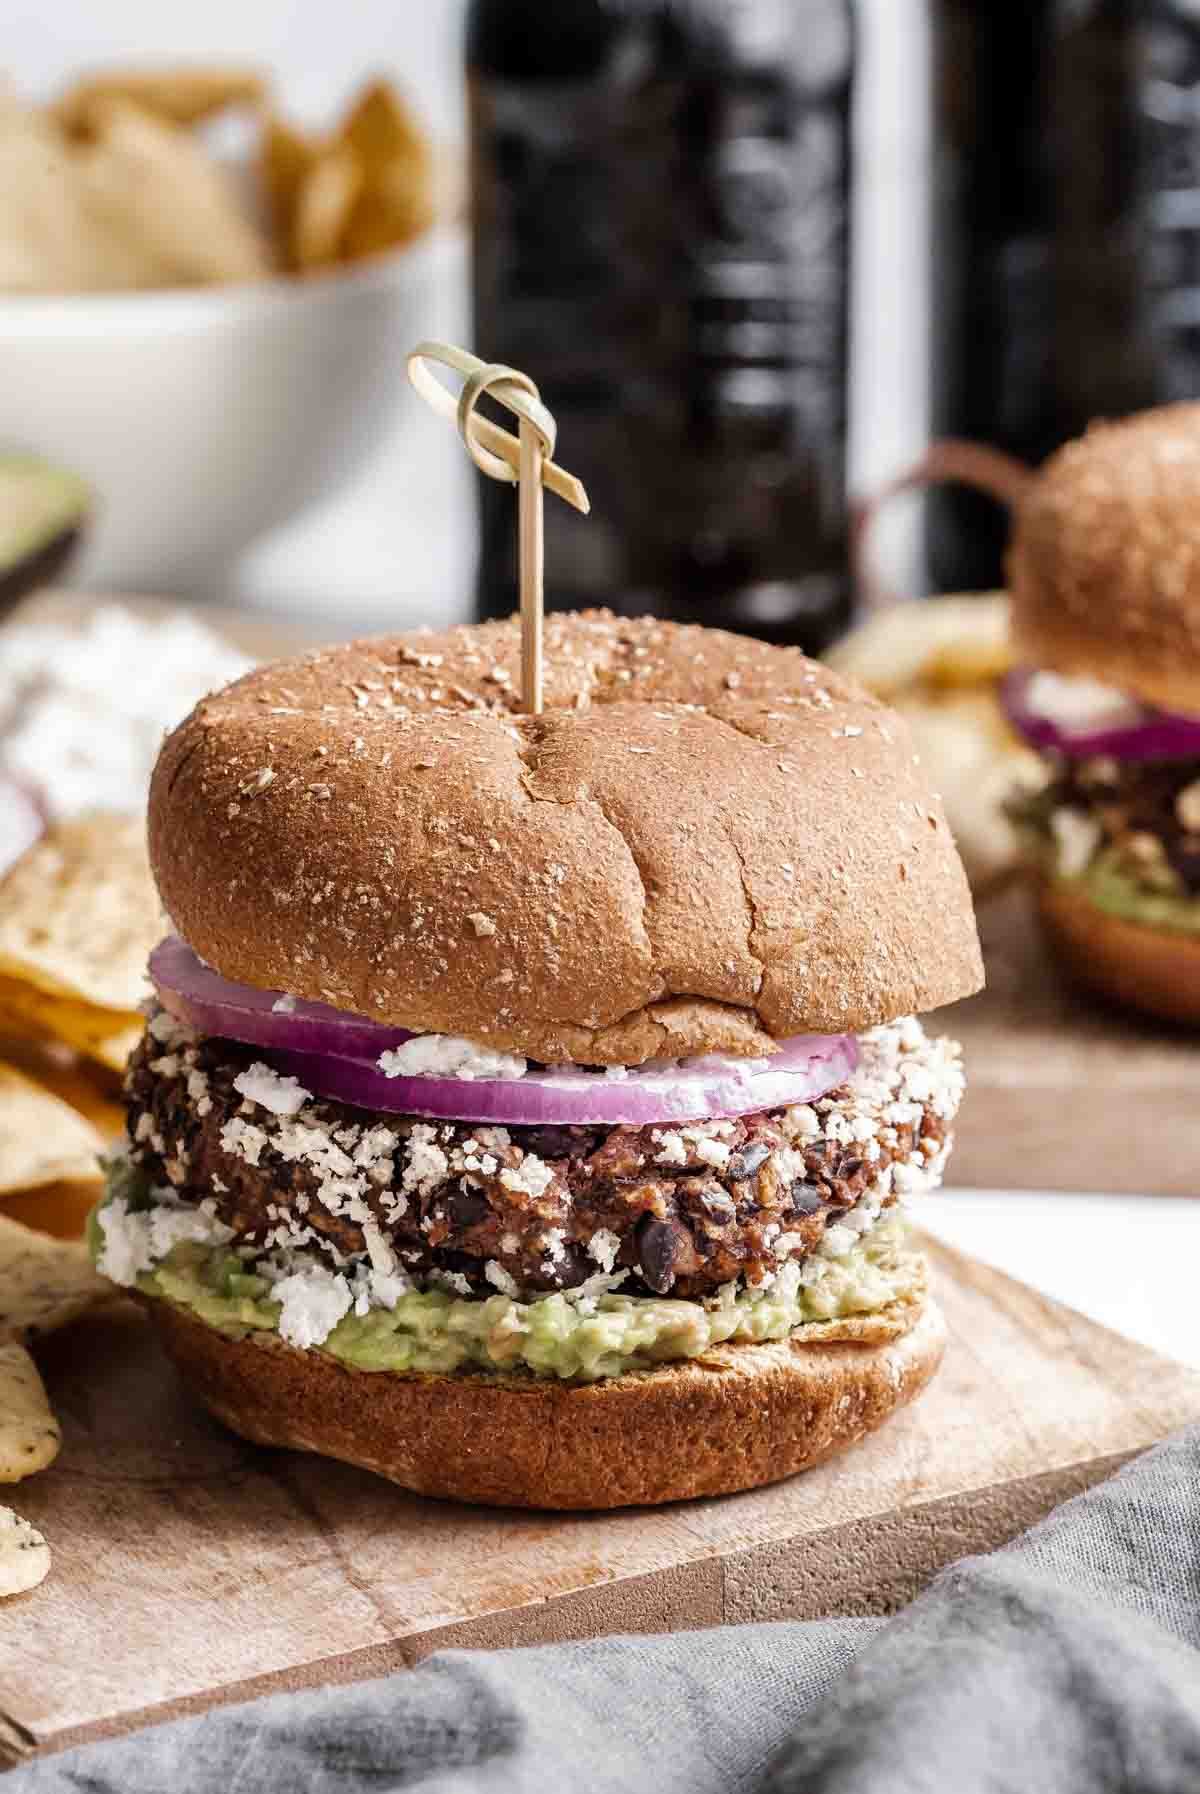 Black bean burger with toothpick on top.